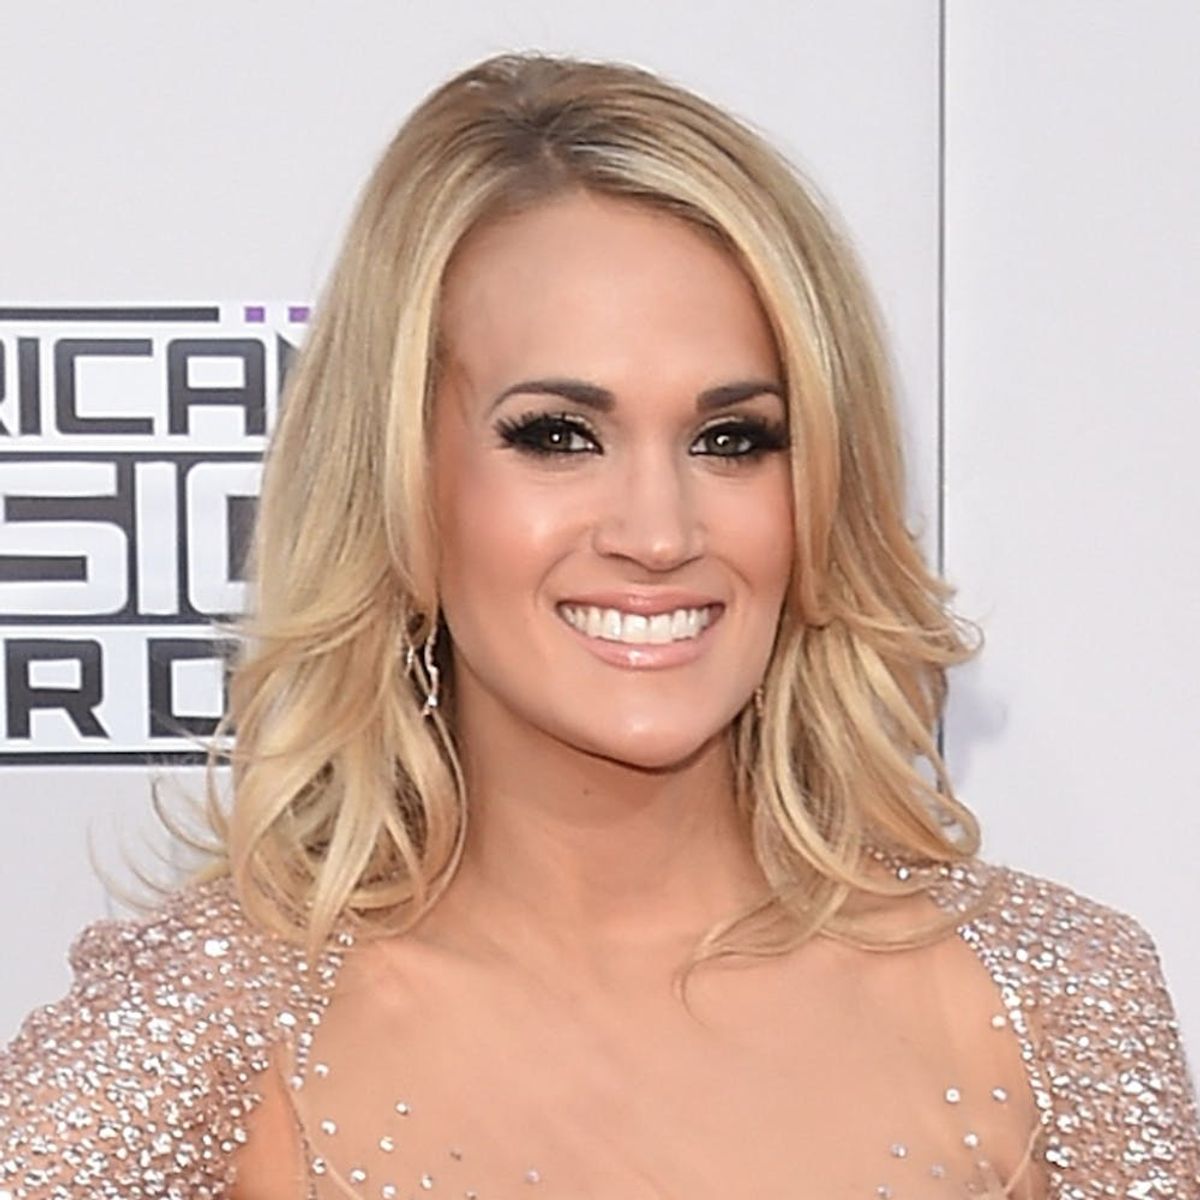 Carrie Underwood Had the Most Adorable Sunday After Christmas